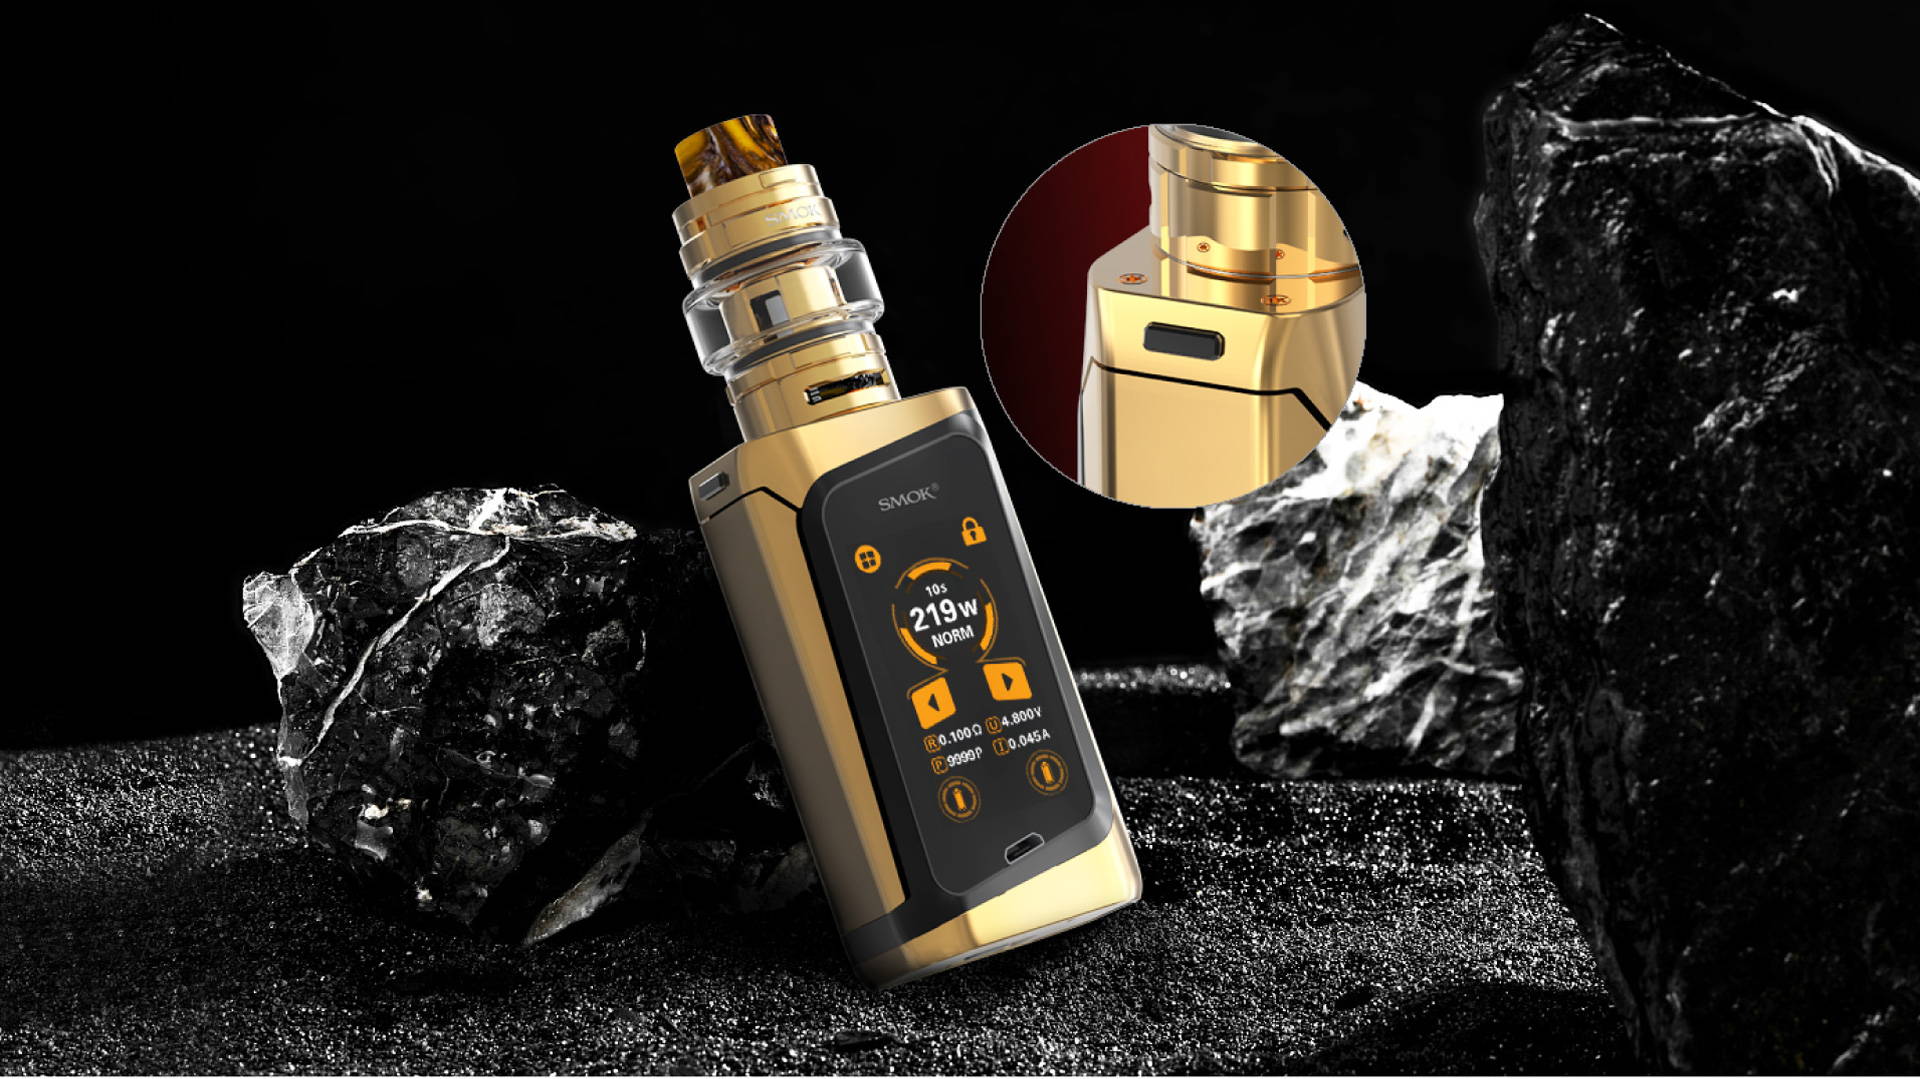 Updated] SMOK Morph Kit Another Alien?